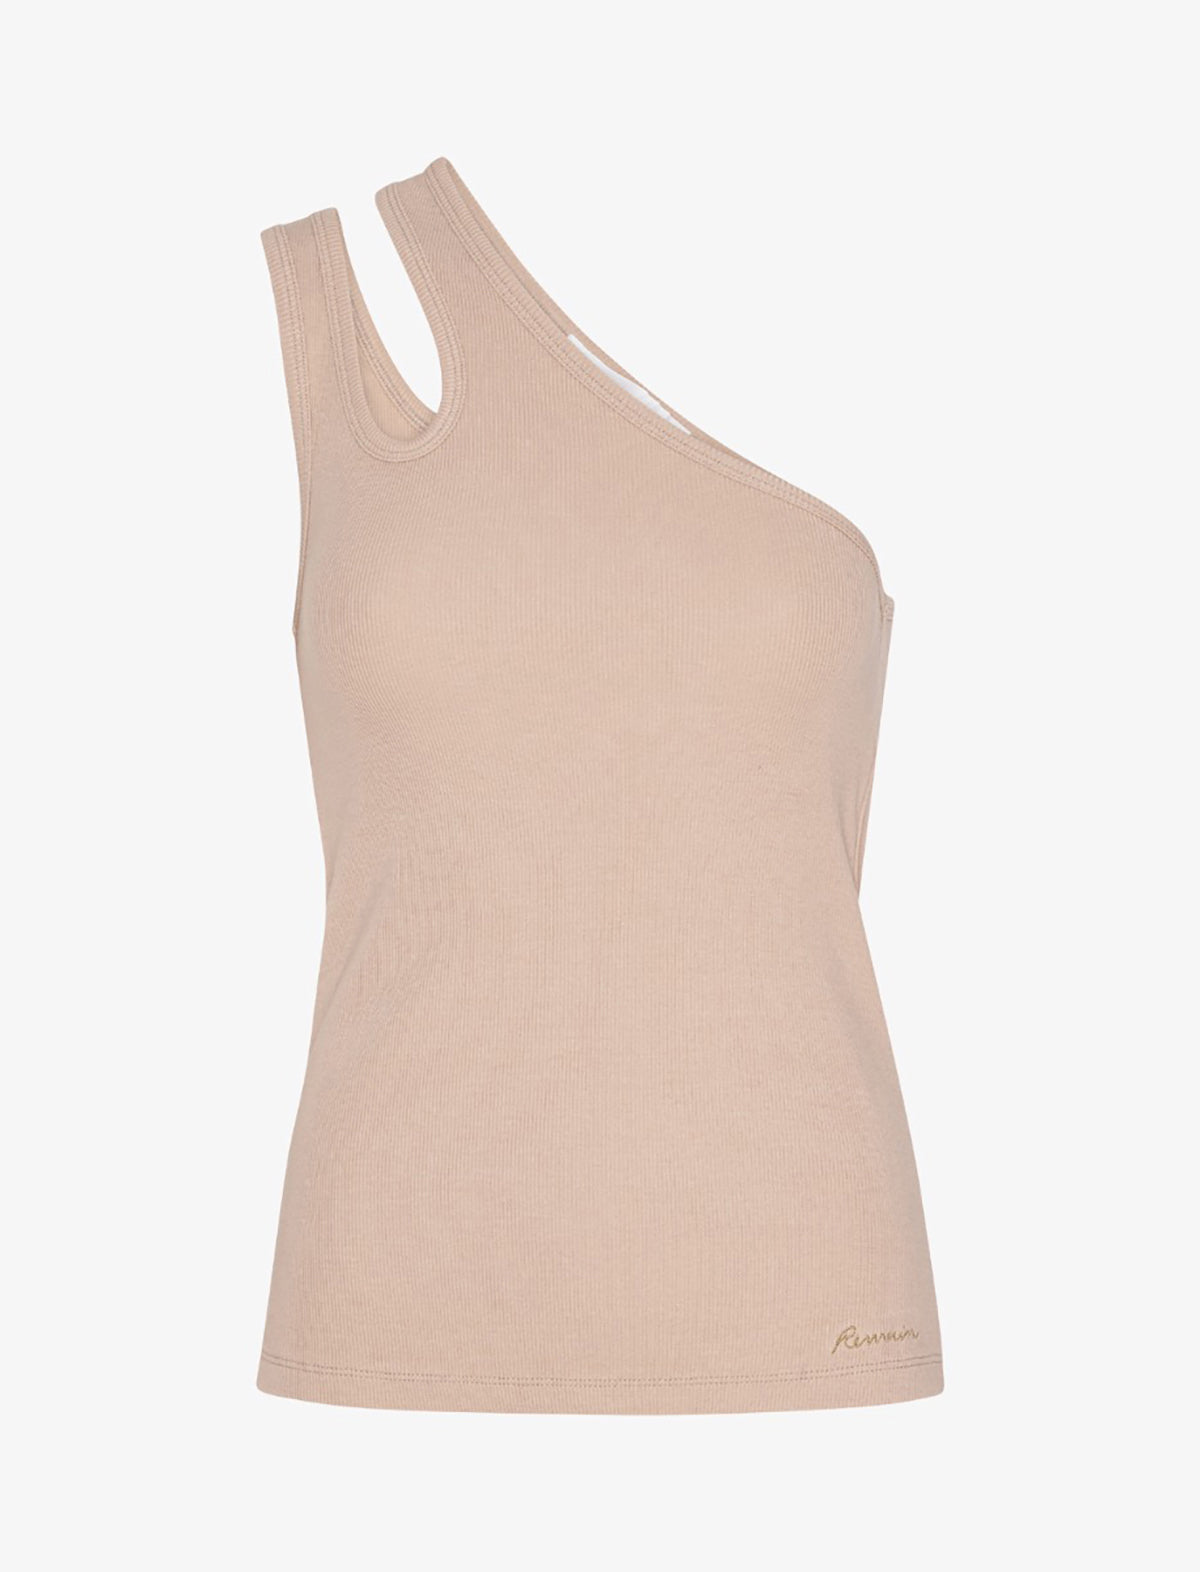 REMAIN Jersey One-Shoulder Top in Warm Taupe